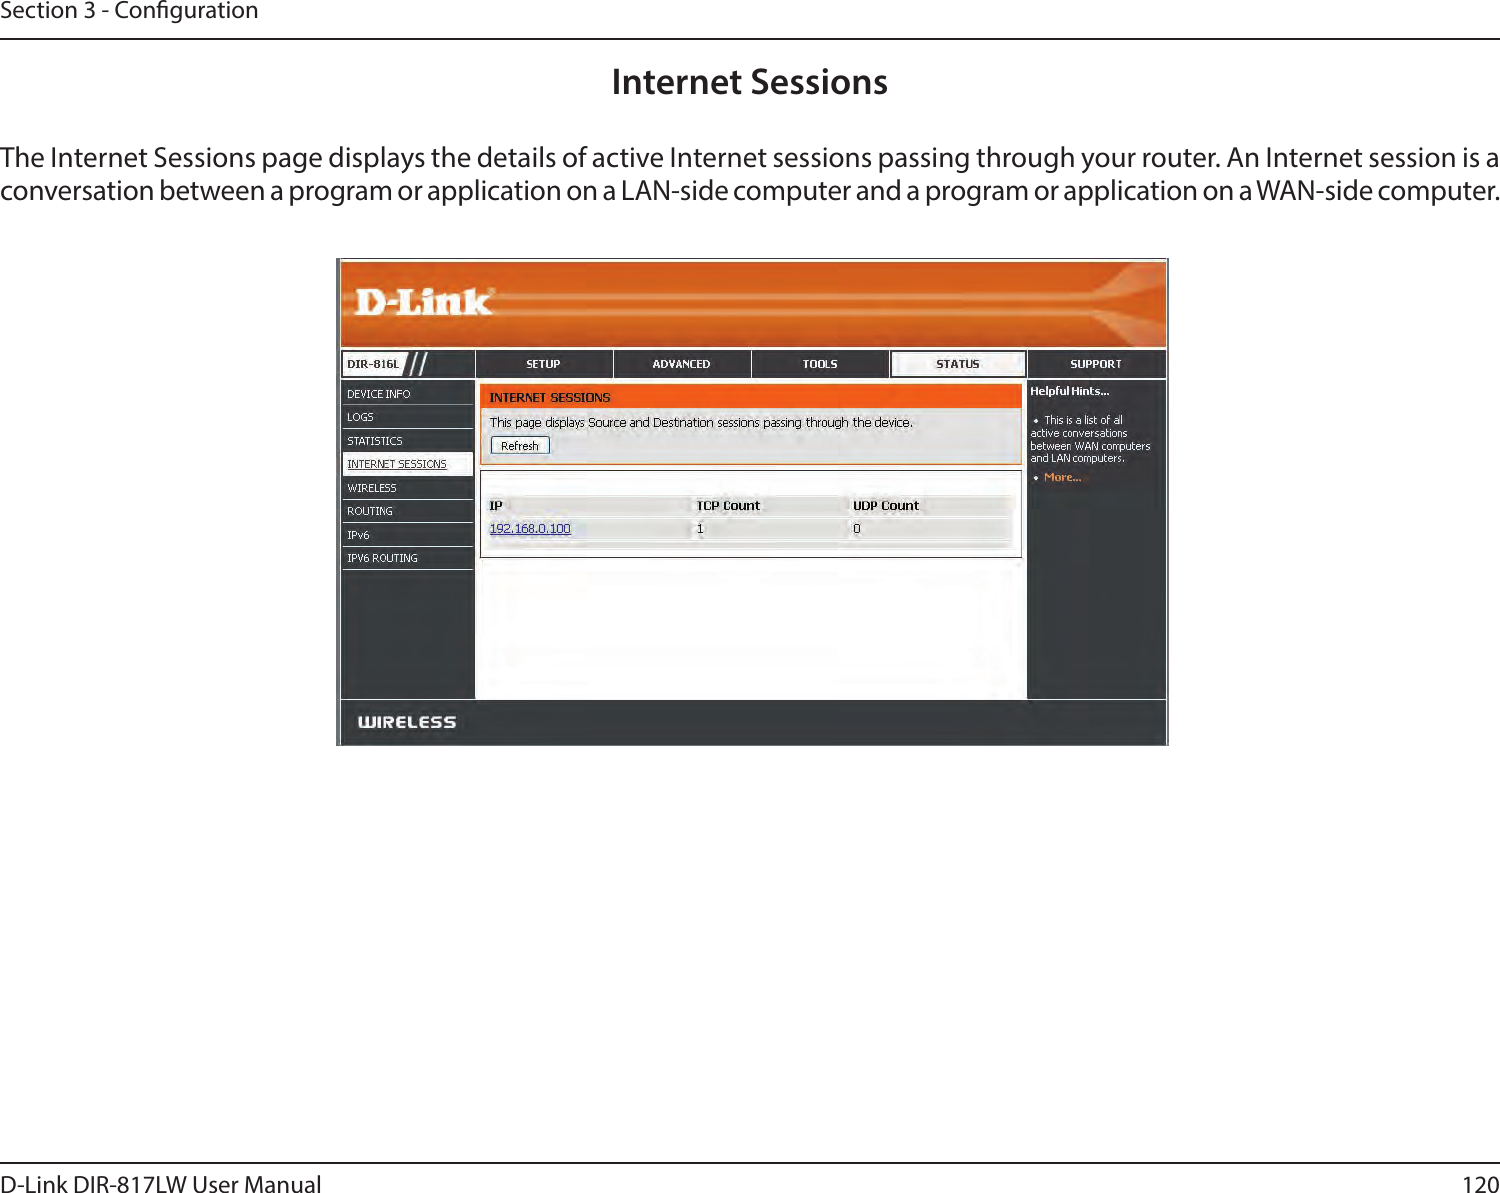 120D-Link DIR-817LW User ManualSection 3 - CongurationInternet SessionsThe Internet Sessions page displays the details of active Internet sessions passing through your router. An Internet session is a conversation between a program or application on a LAN-side computer and a program or application on a WAN-side computer. 